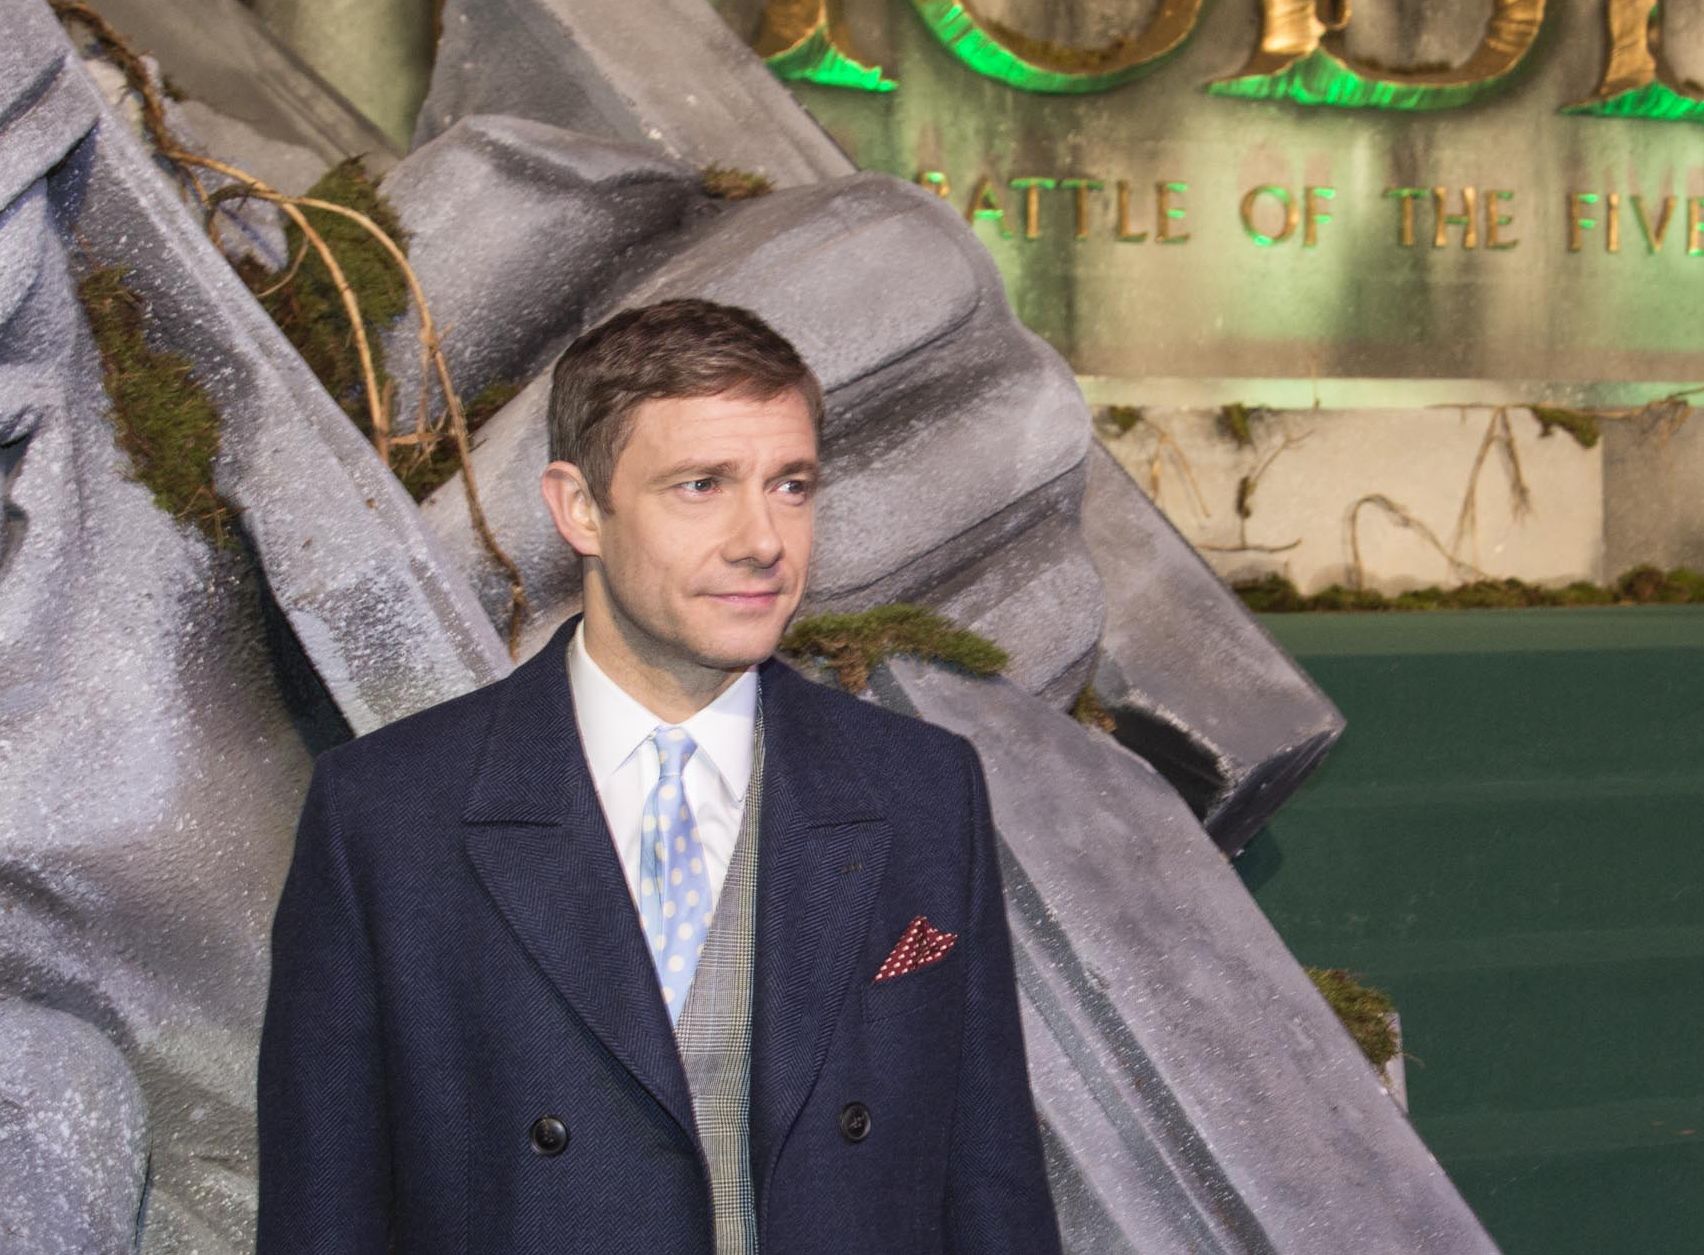 Martin Freeman at The Hobbit: The Battle of the Five Armies